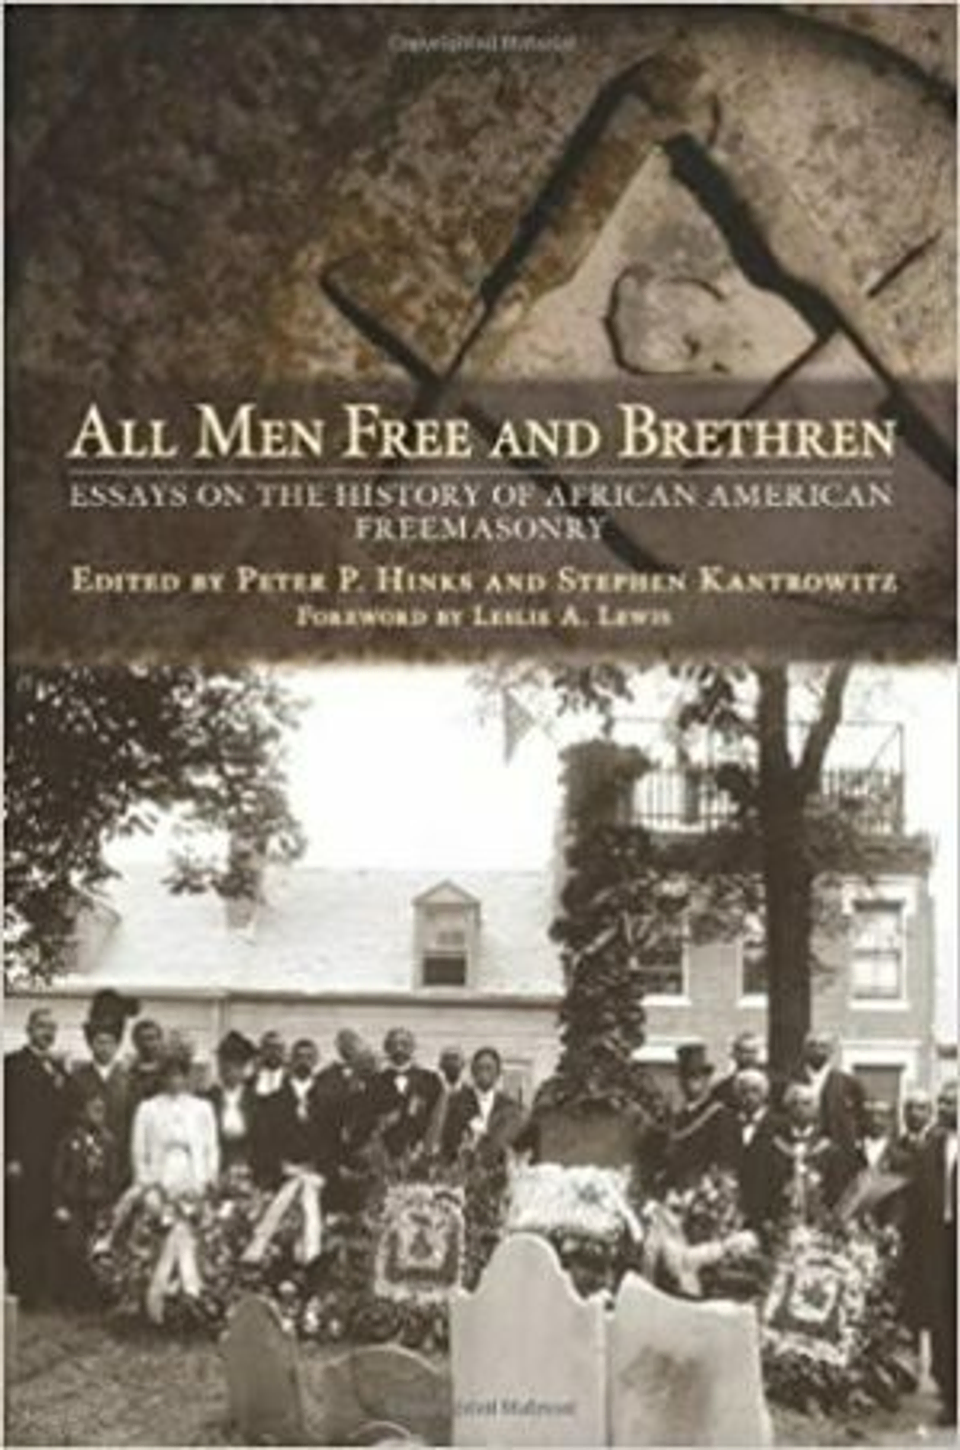 All Men Free and Brethren: Essays on the History of African American Freemasonry book by Stephen Kantrowitz